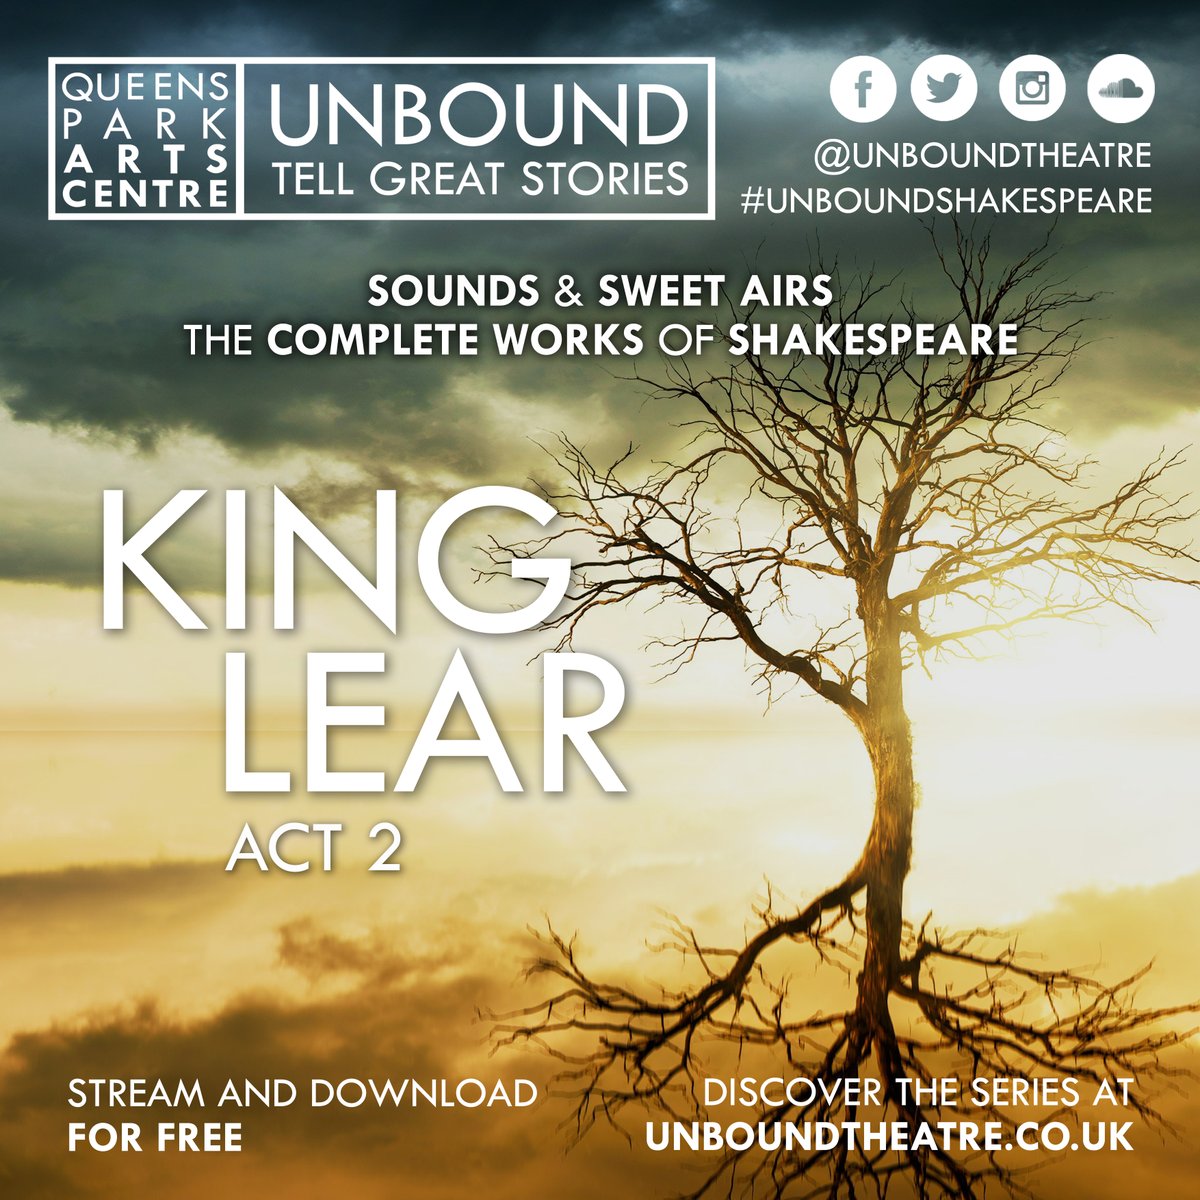 Having fled Goneril's house in a rage, Lear calls upon Regan in expectation of a kinder reception, only to find more than one storm approaching...

Act 2 of 'King Lear' is free to stream and download:
soundcloud.com/unboundtheatre…

#TellGreatStories #AudioDramaSunday #ShakespeareSunday